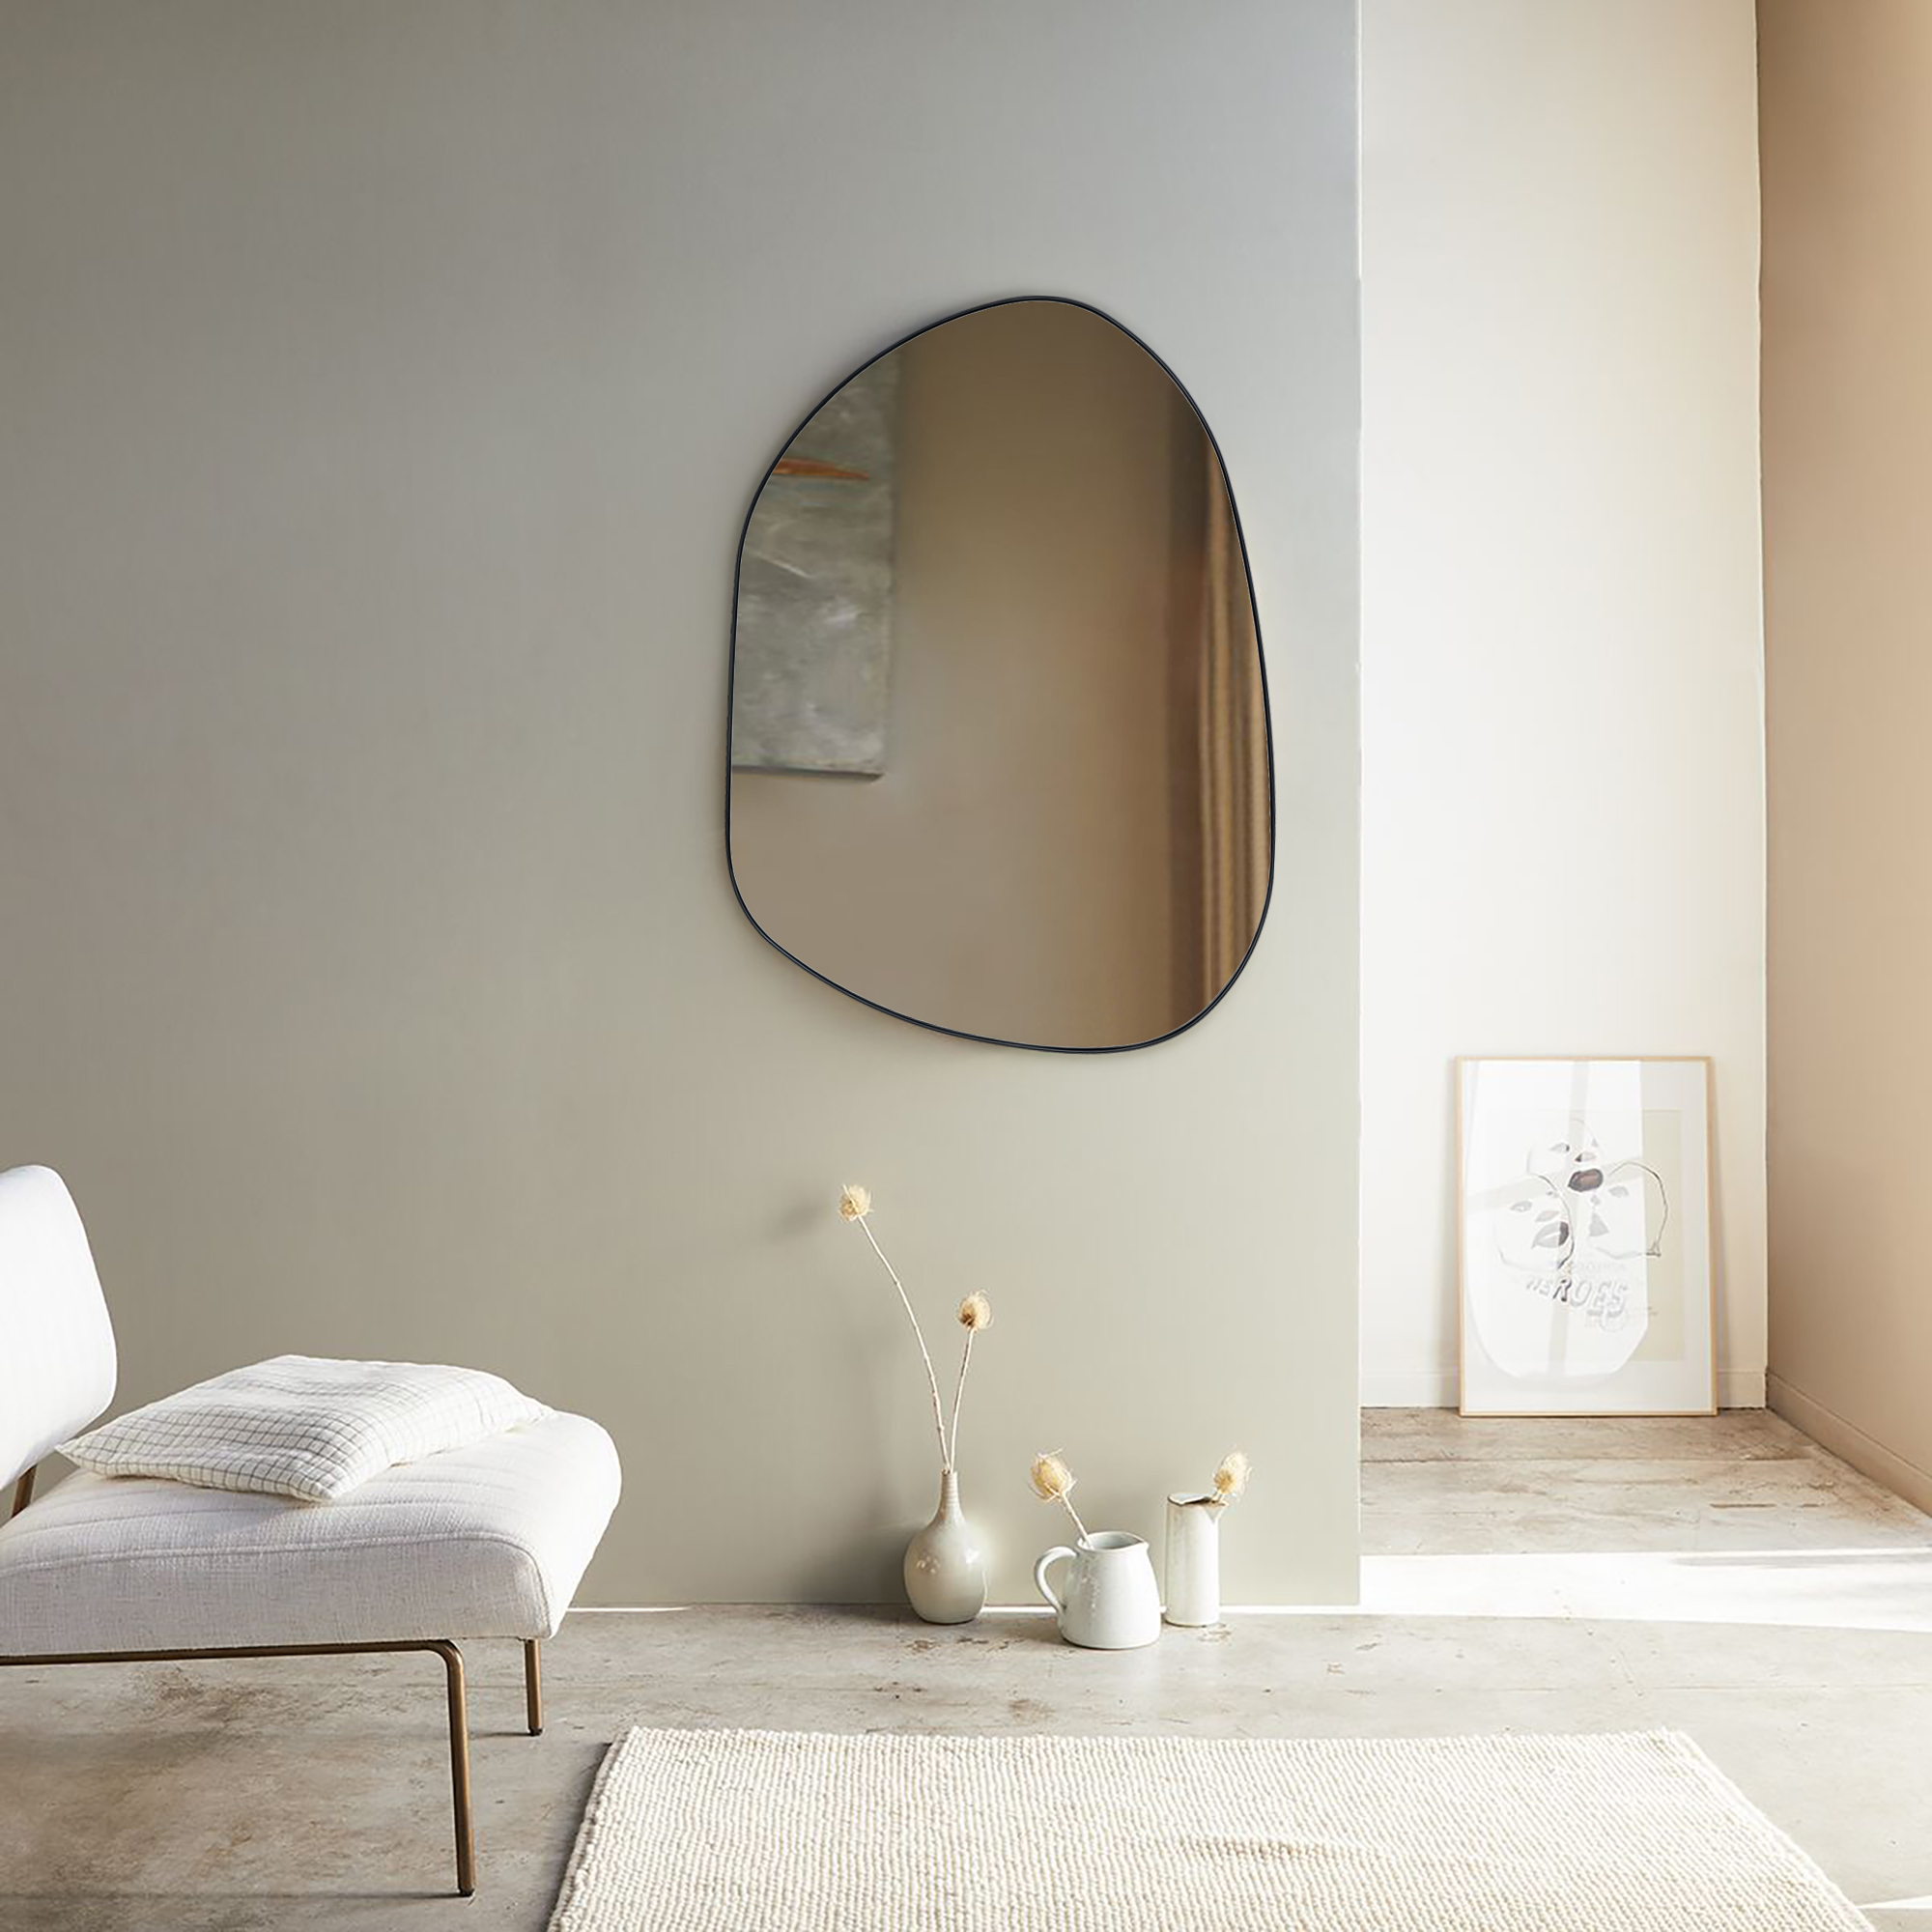 Bertlinde asymmetrical wall mirror irregular shaped mirror for living room, bathroom or entry-30x22- Oil Rubbed Bronze